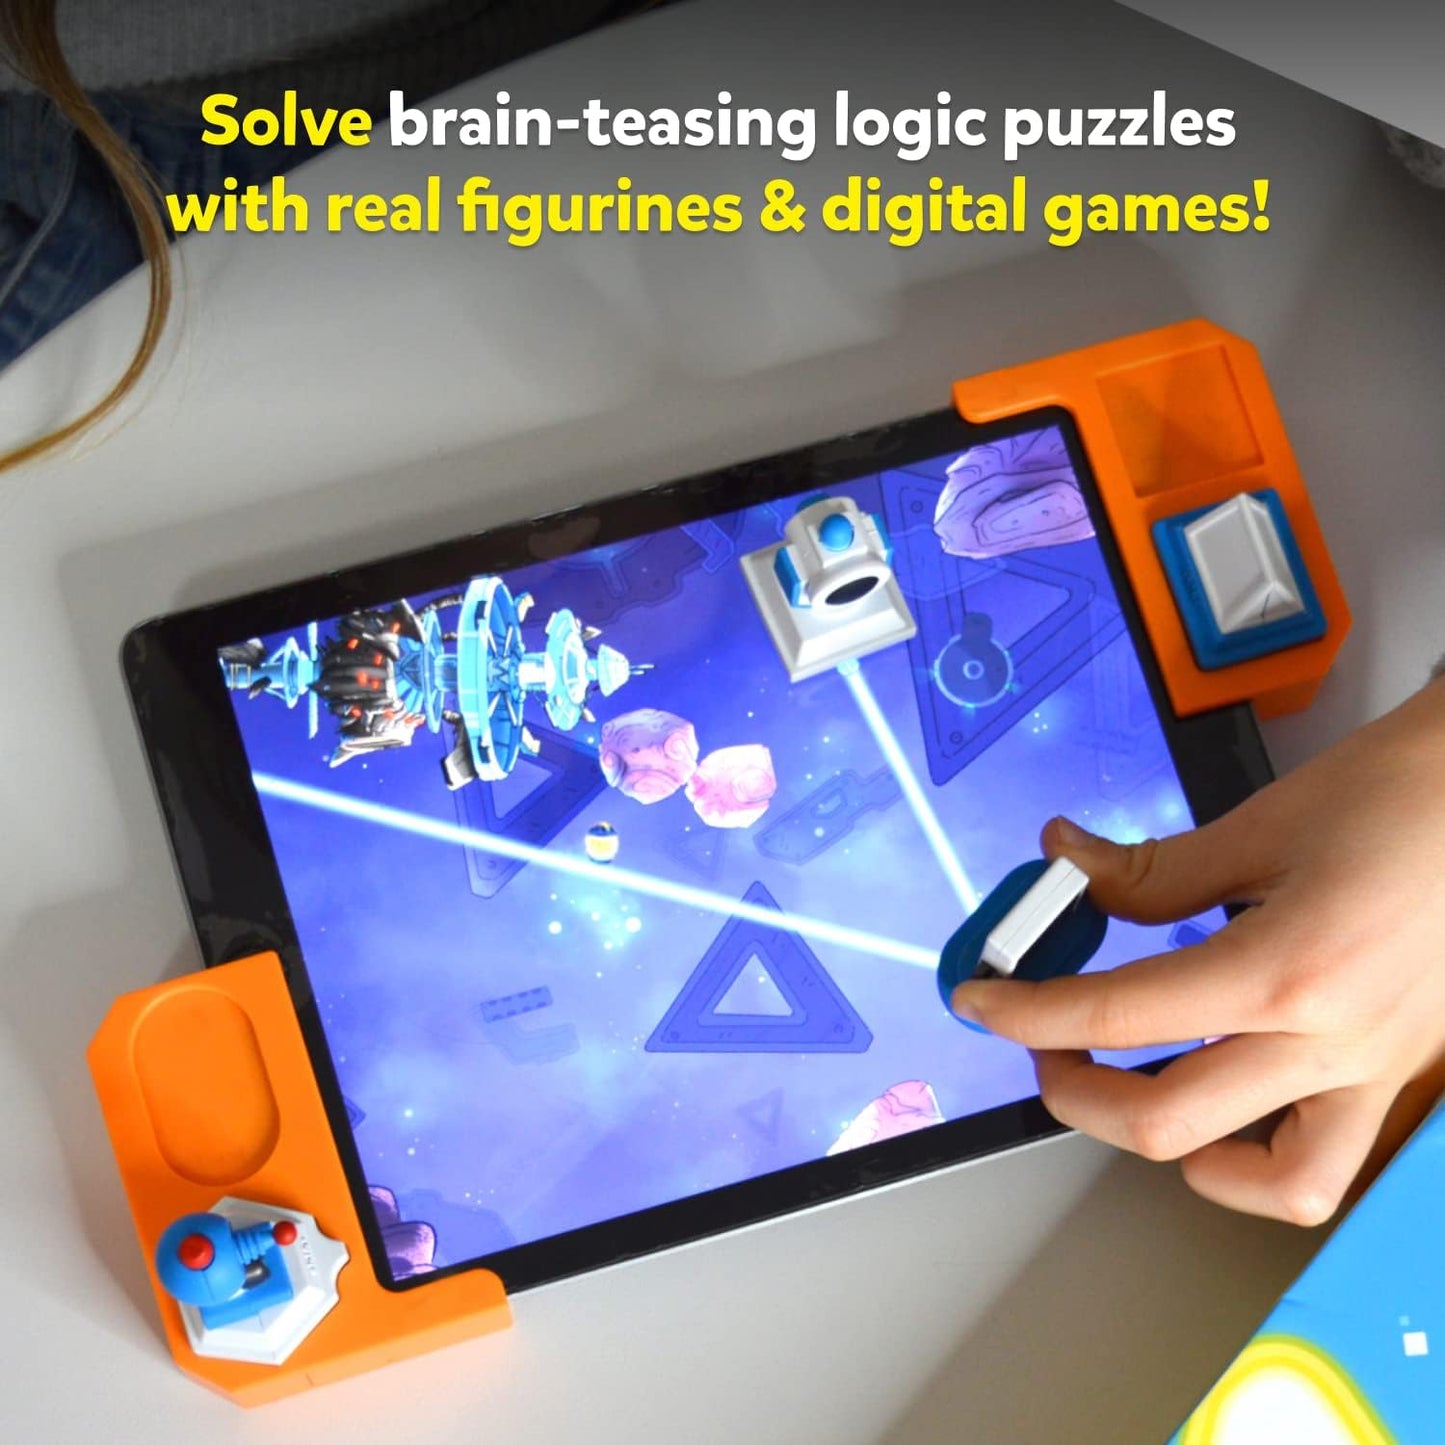 Play Interactive STEM Toys - Tacto Laser (Kit + App) | Educational Toy Science Kit for Kids | 4 5 6 7 8 Year Old Birthday Gifts | Brain Games & STEM Learning | 200+ Puzzles (Tablet not Included)